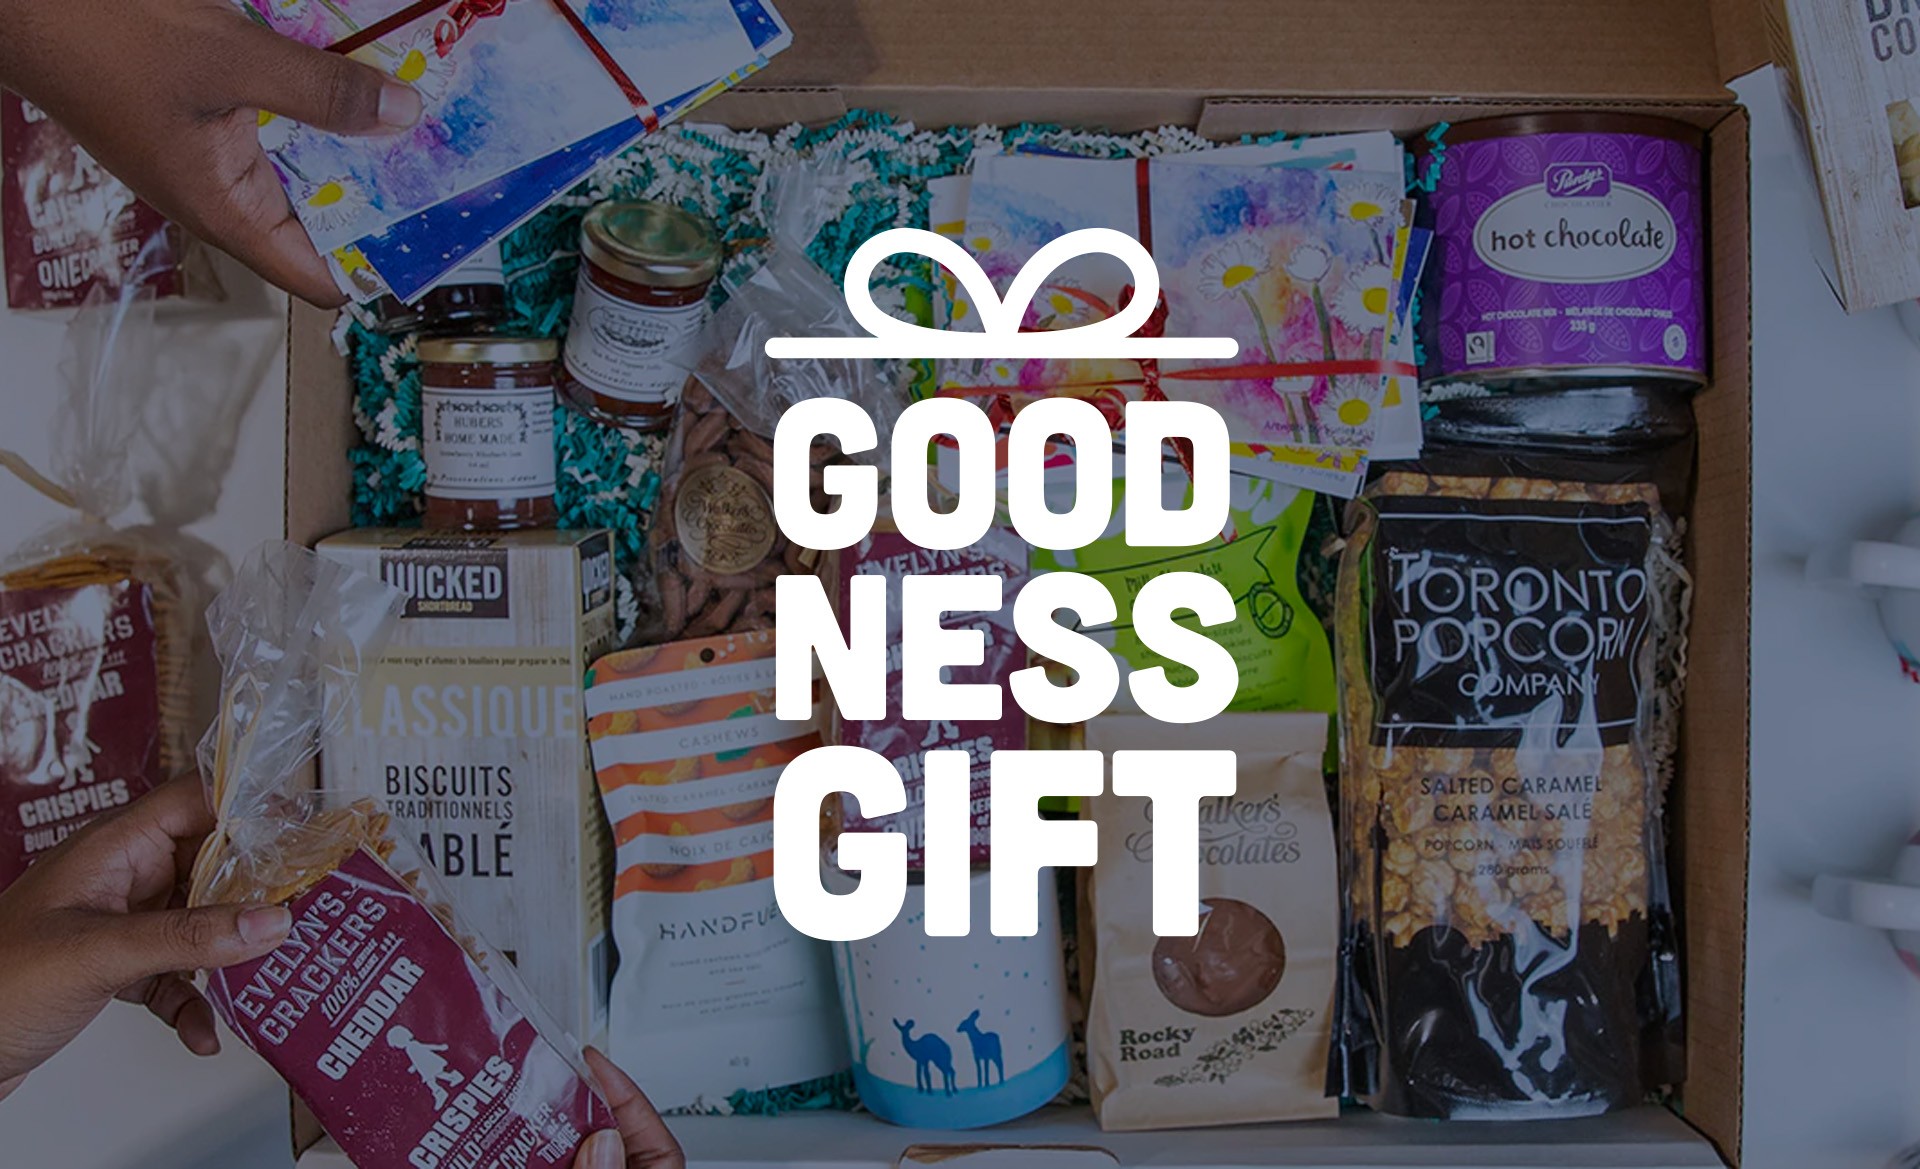 Goodness Gift logo overlaid on top of gift box full of food and gift items